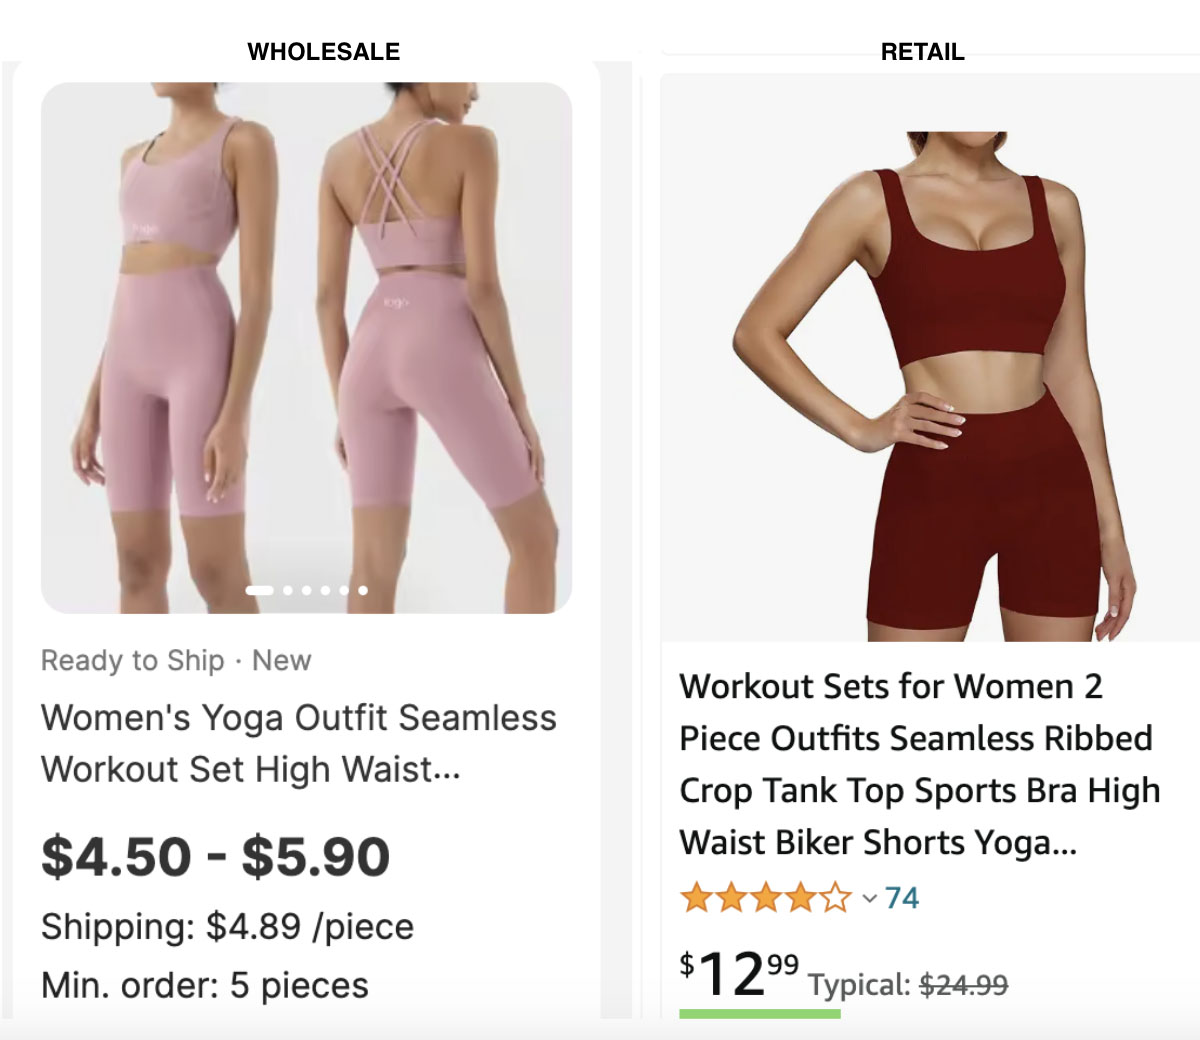 Athleisure yoga outfits wholesale Alibaba pricing retail Amazon pricing.